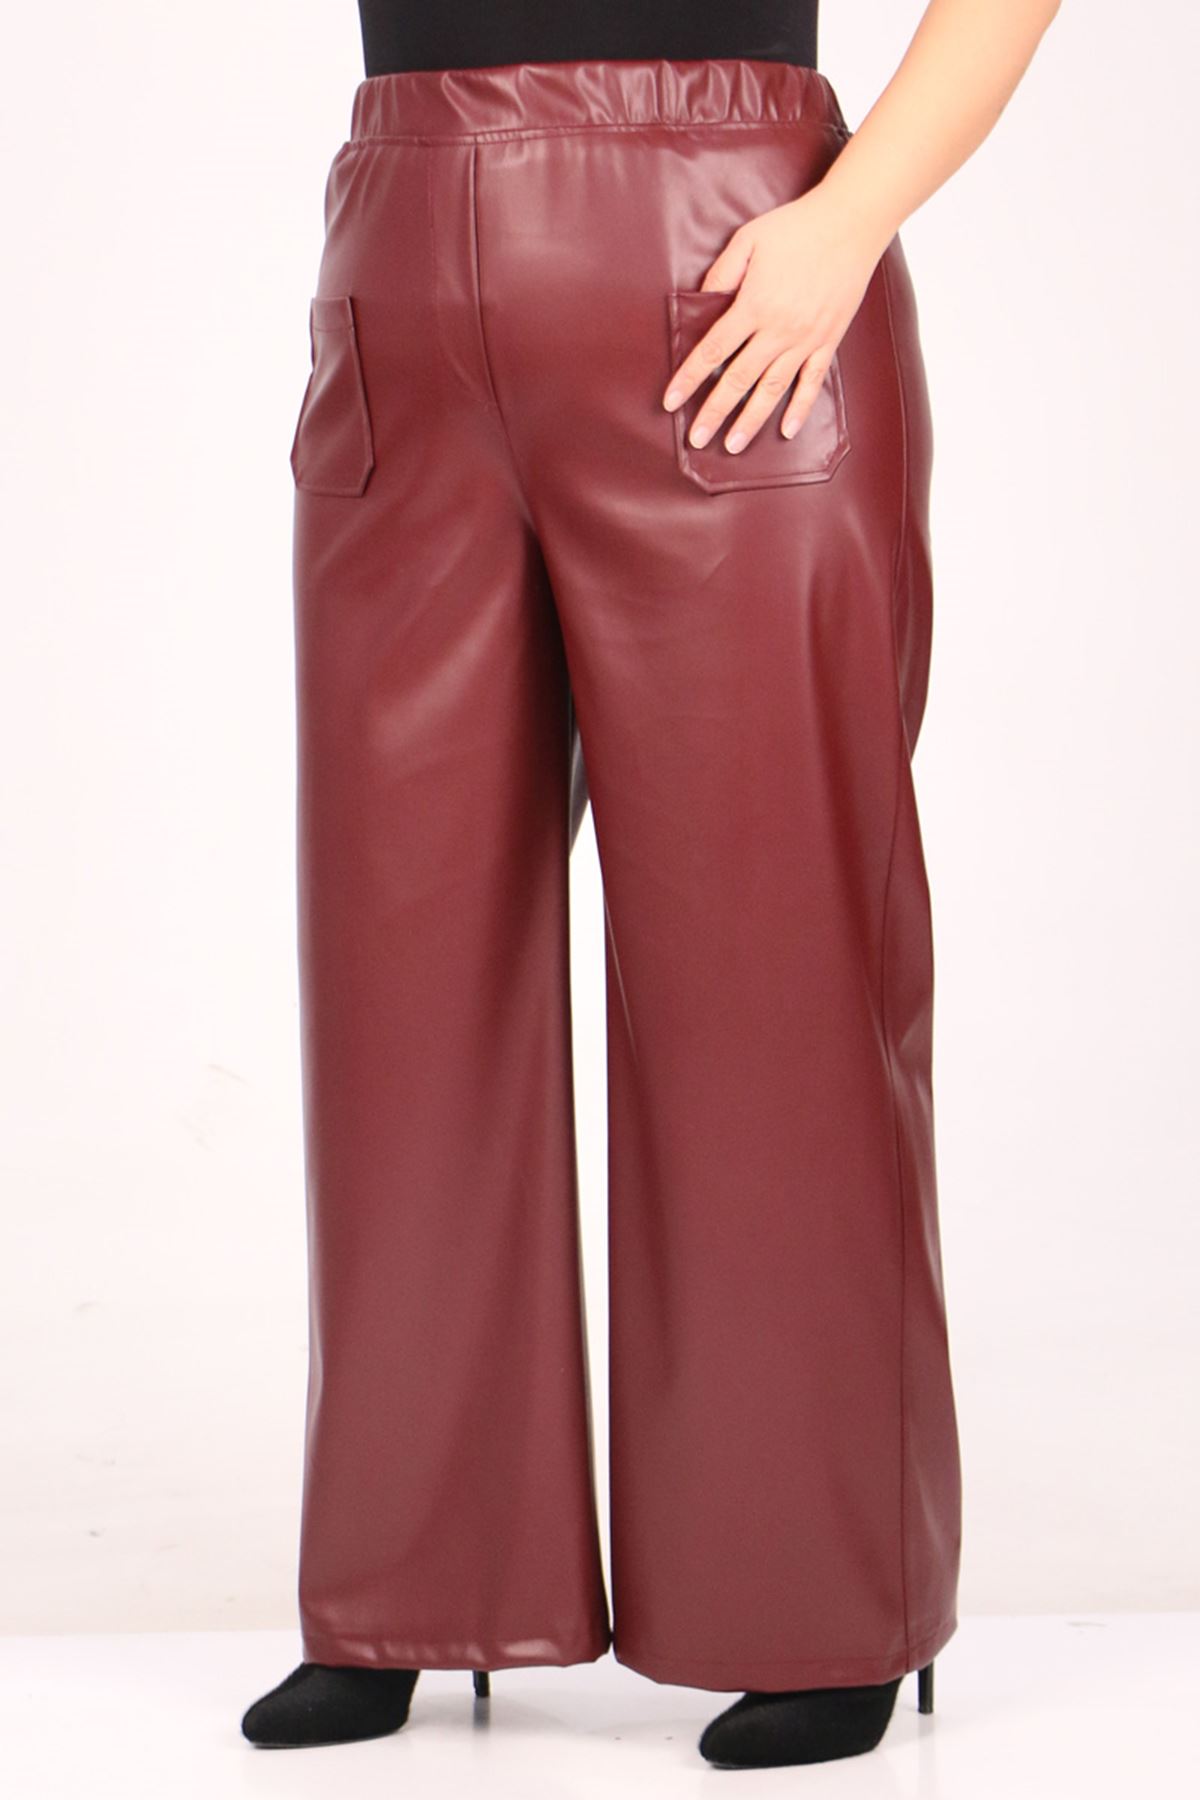 39050 Large Size Wide Leg Leather Trousers-Burgundy